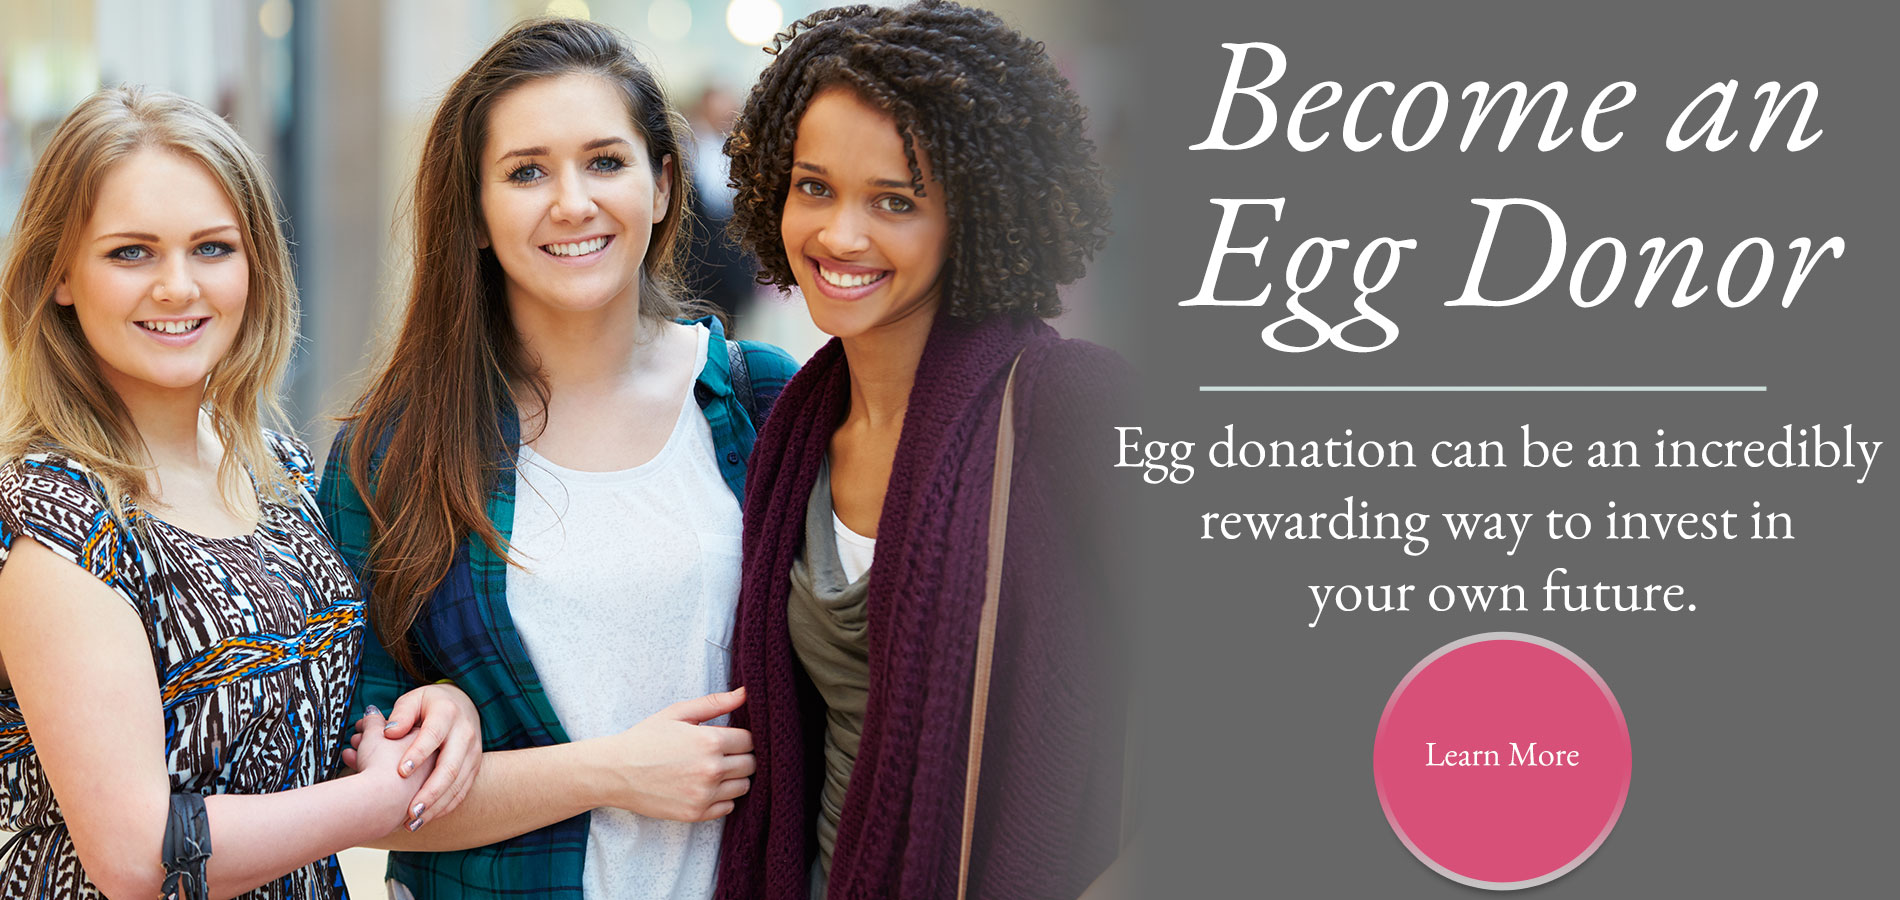 Become an Egg Donor Egg donation can be an incredibly rewarding way to invest in your own future.